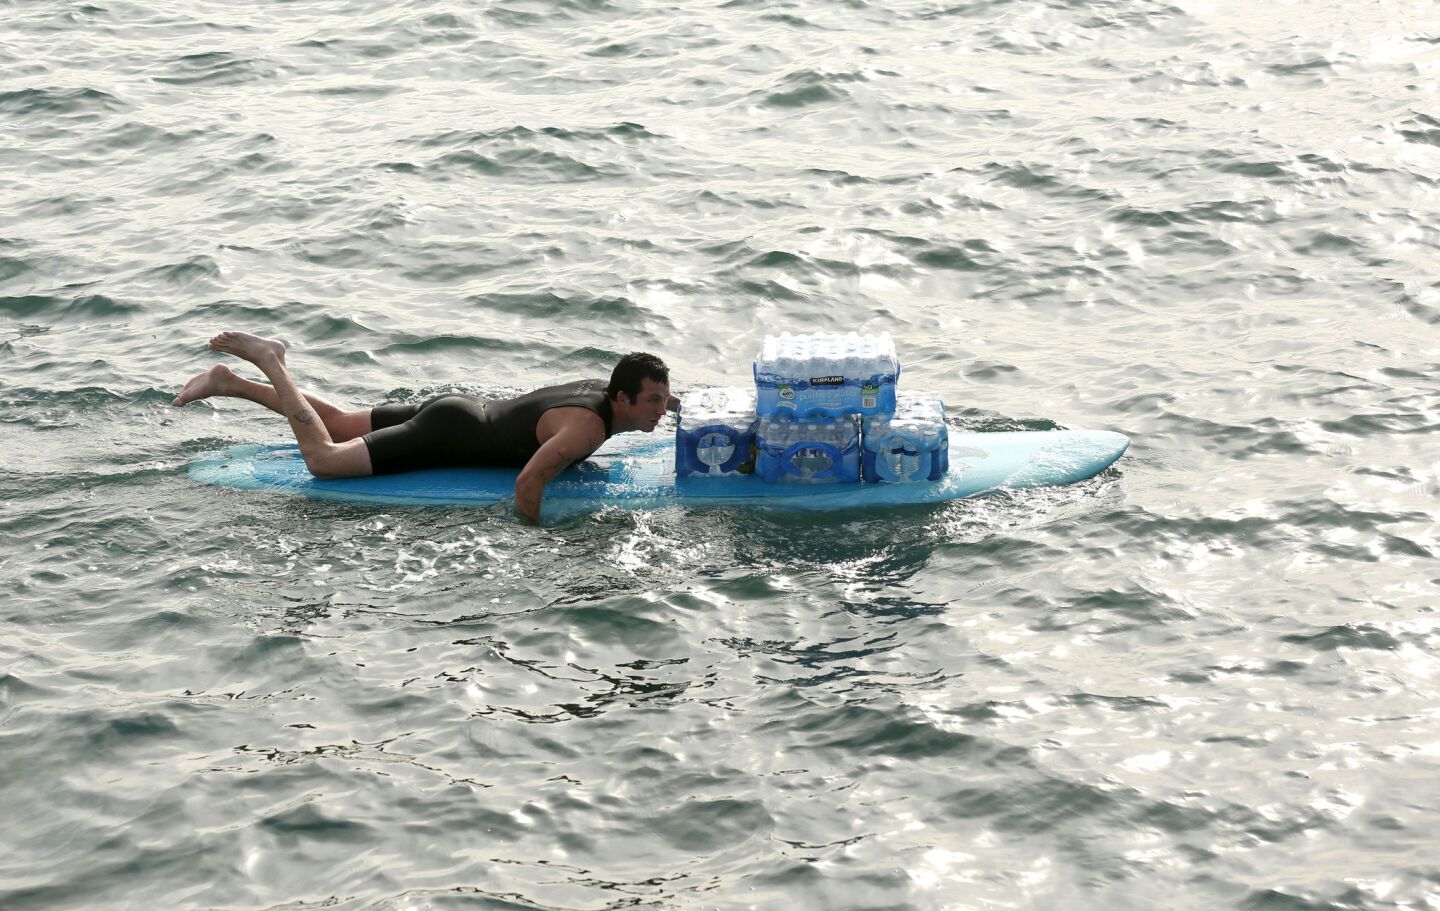 A man ferries cases of water by surfboard to help residents in the Paradise Cove area of Malibu.